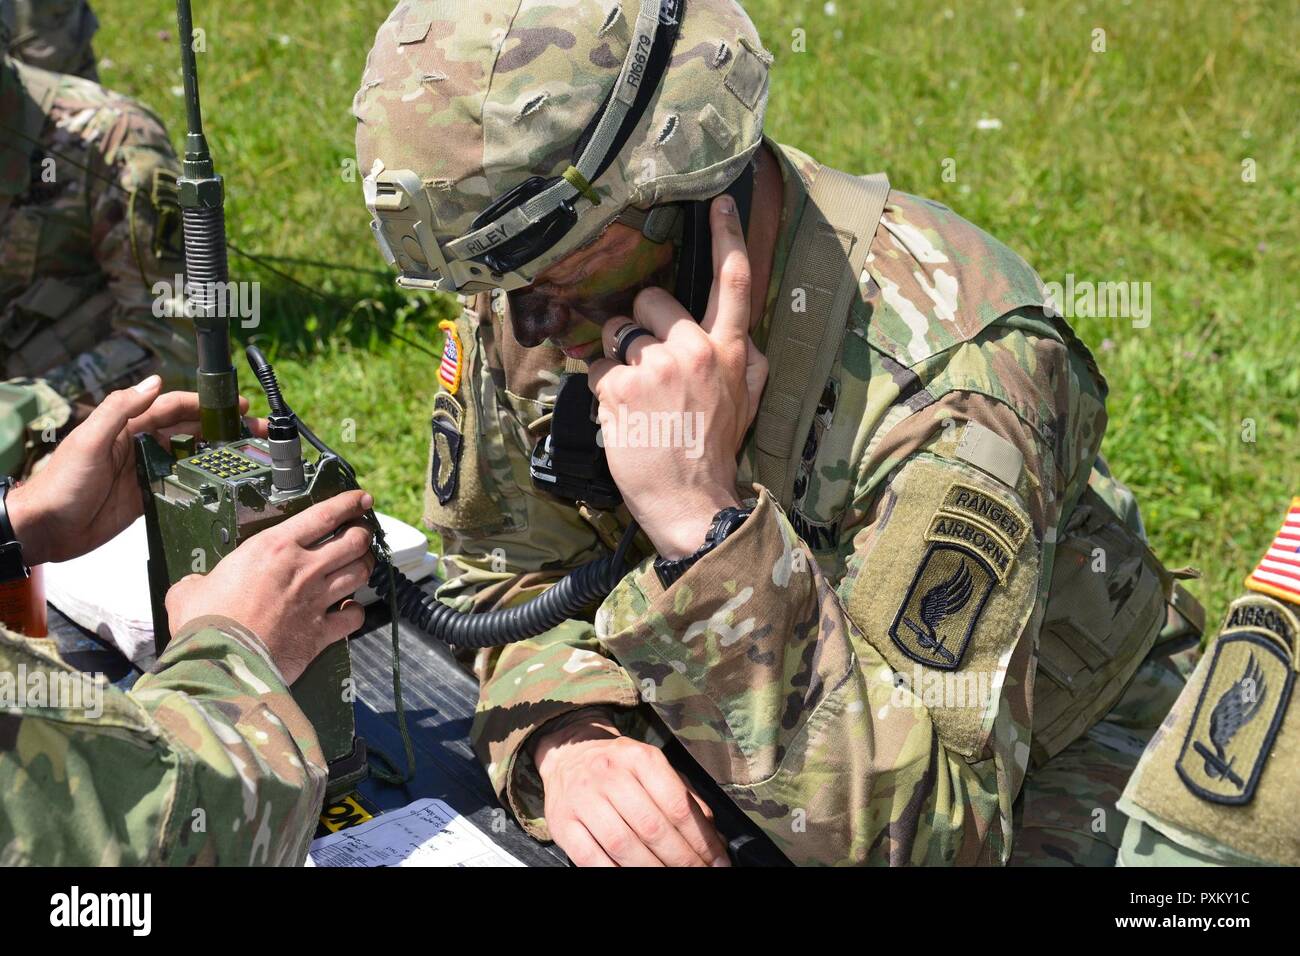 U.S. Army Paratrooper, assigned to the 2nd Battalion, 503rd Infantry Regiment, 173rd Airborne Brigade, conducts a radio check during airborne operations at Juliet Drop Zone in Pordenone, Italy, June 8, 2017. The 173rd Airborne Brigade is the U.S. Army Contingency Response Force in Europe, capable of projecting ready forces anywhere in the U.S. European, Africa or Central Commands areas of responsibility within 18 hours. Stock Photo